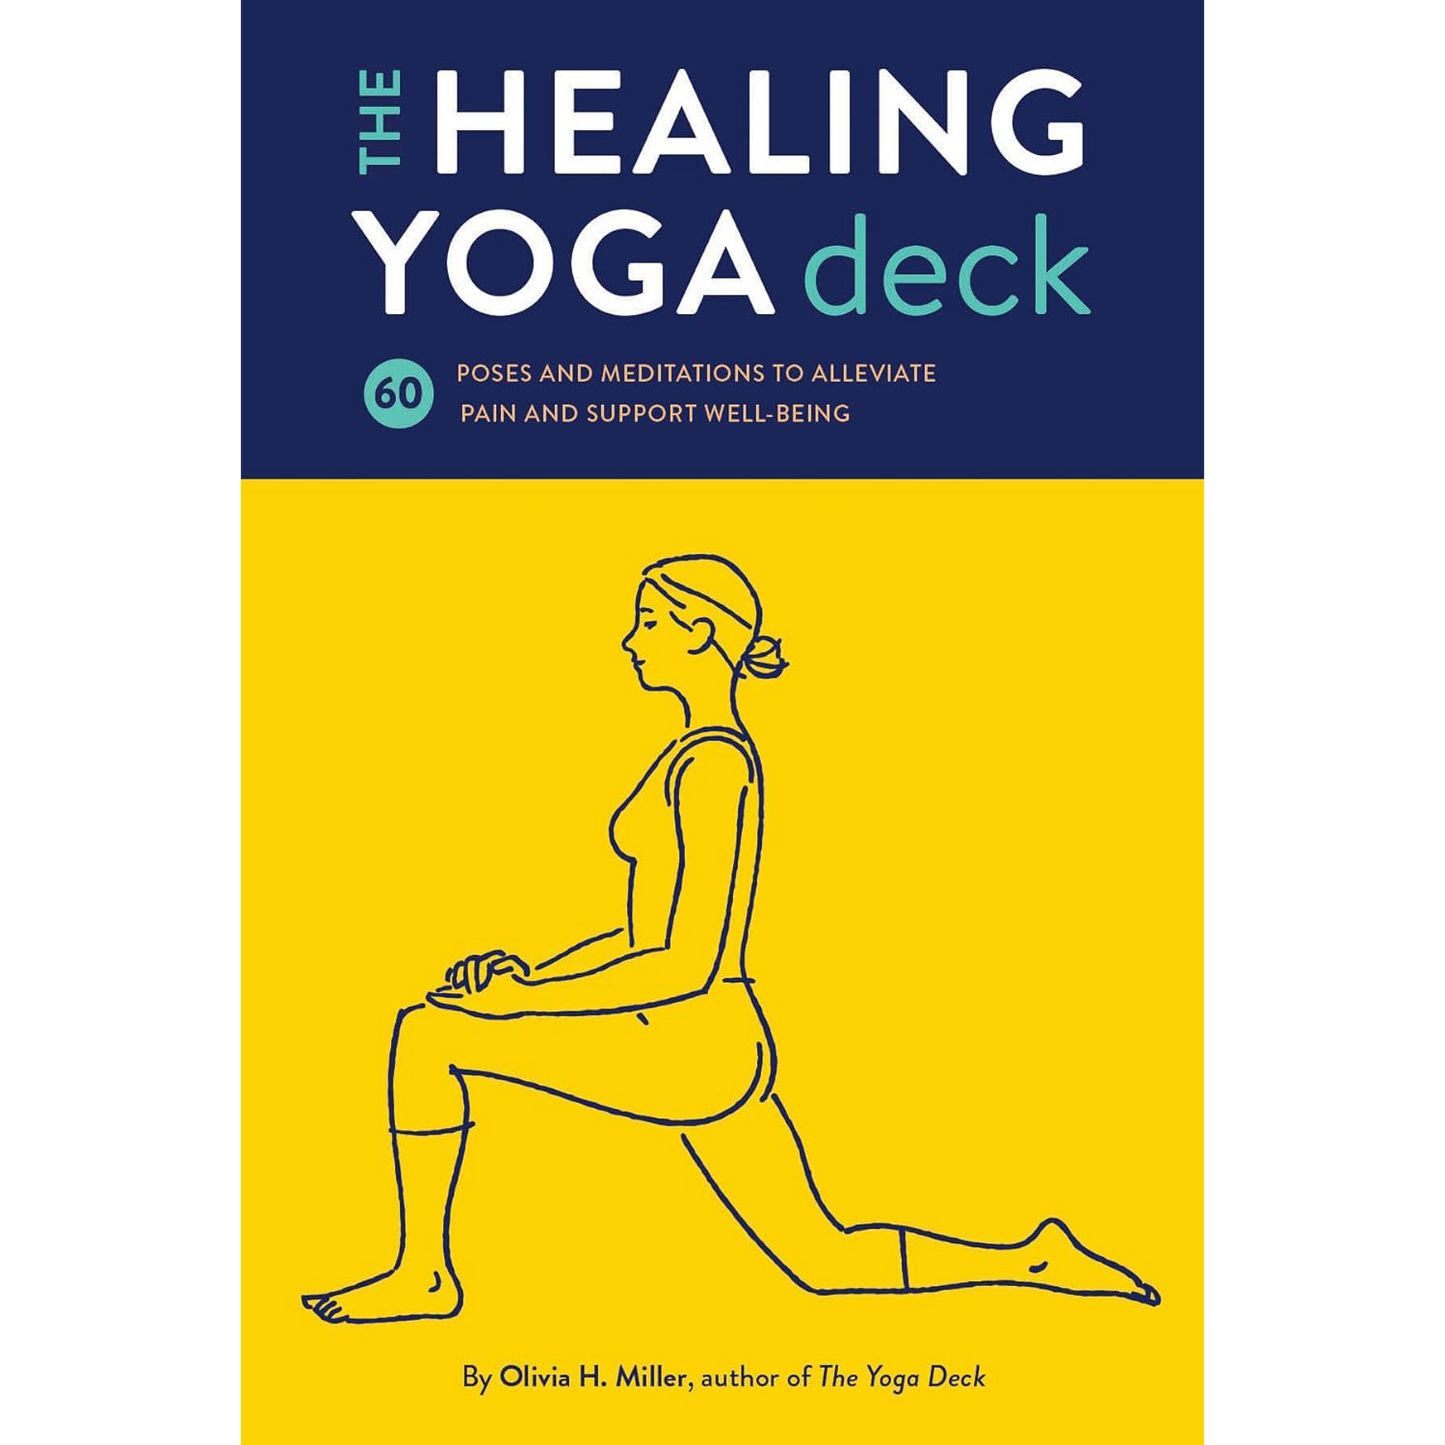 The Healing Yoga Deck: 60 Poses and Meditations to Alleviate Pain and Support Well-Being (Deck of Cards with Yoga Poses for Healing, Yoga for Health ... Meditation and Exercises for Pain Relief)